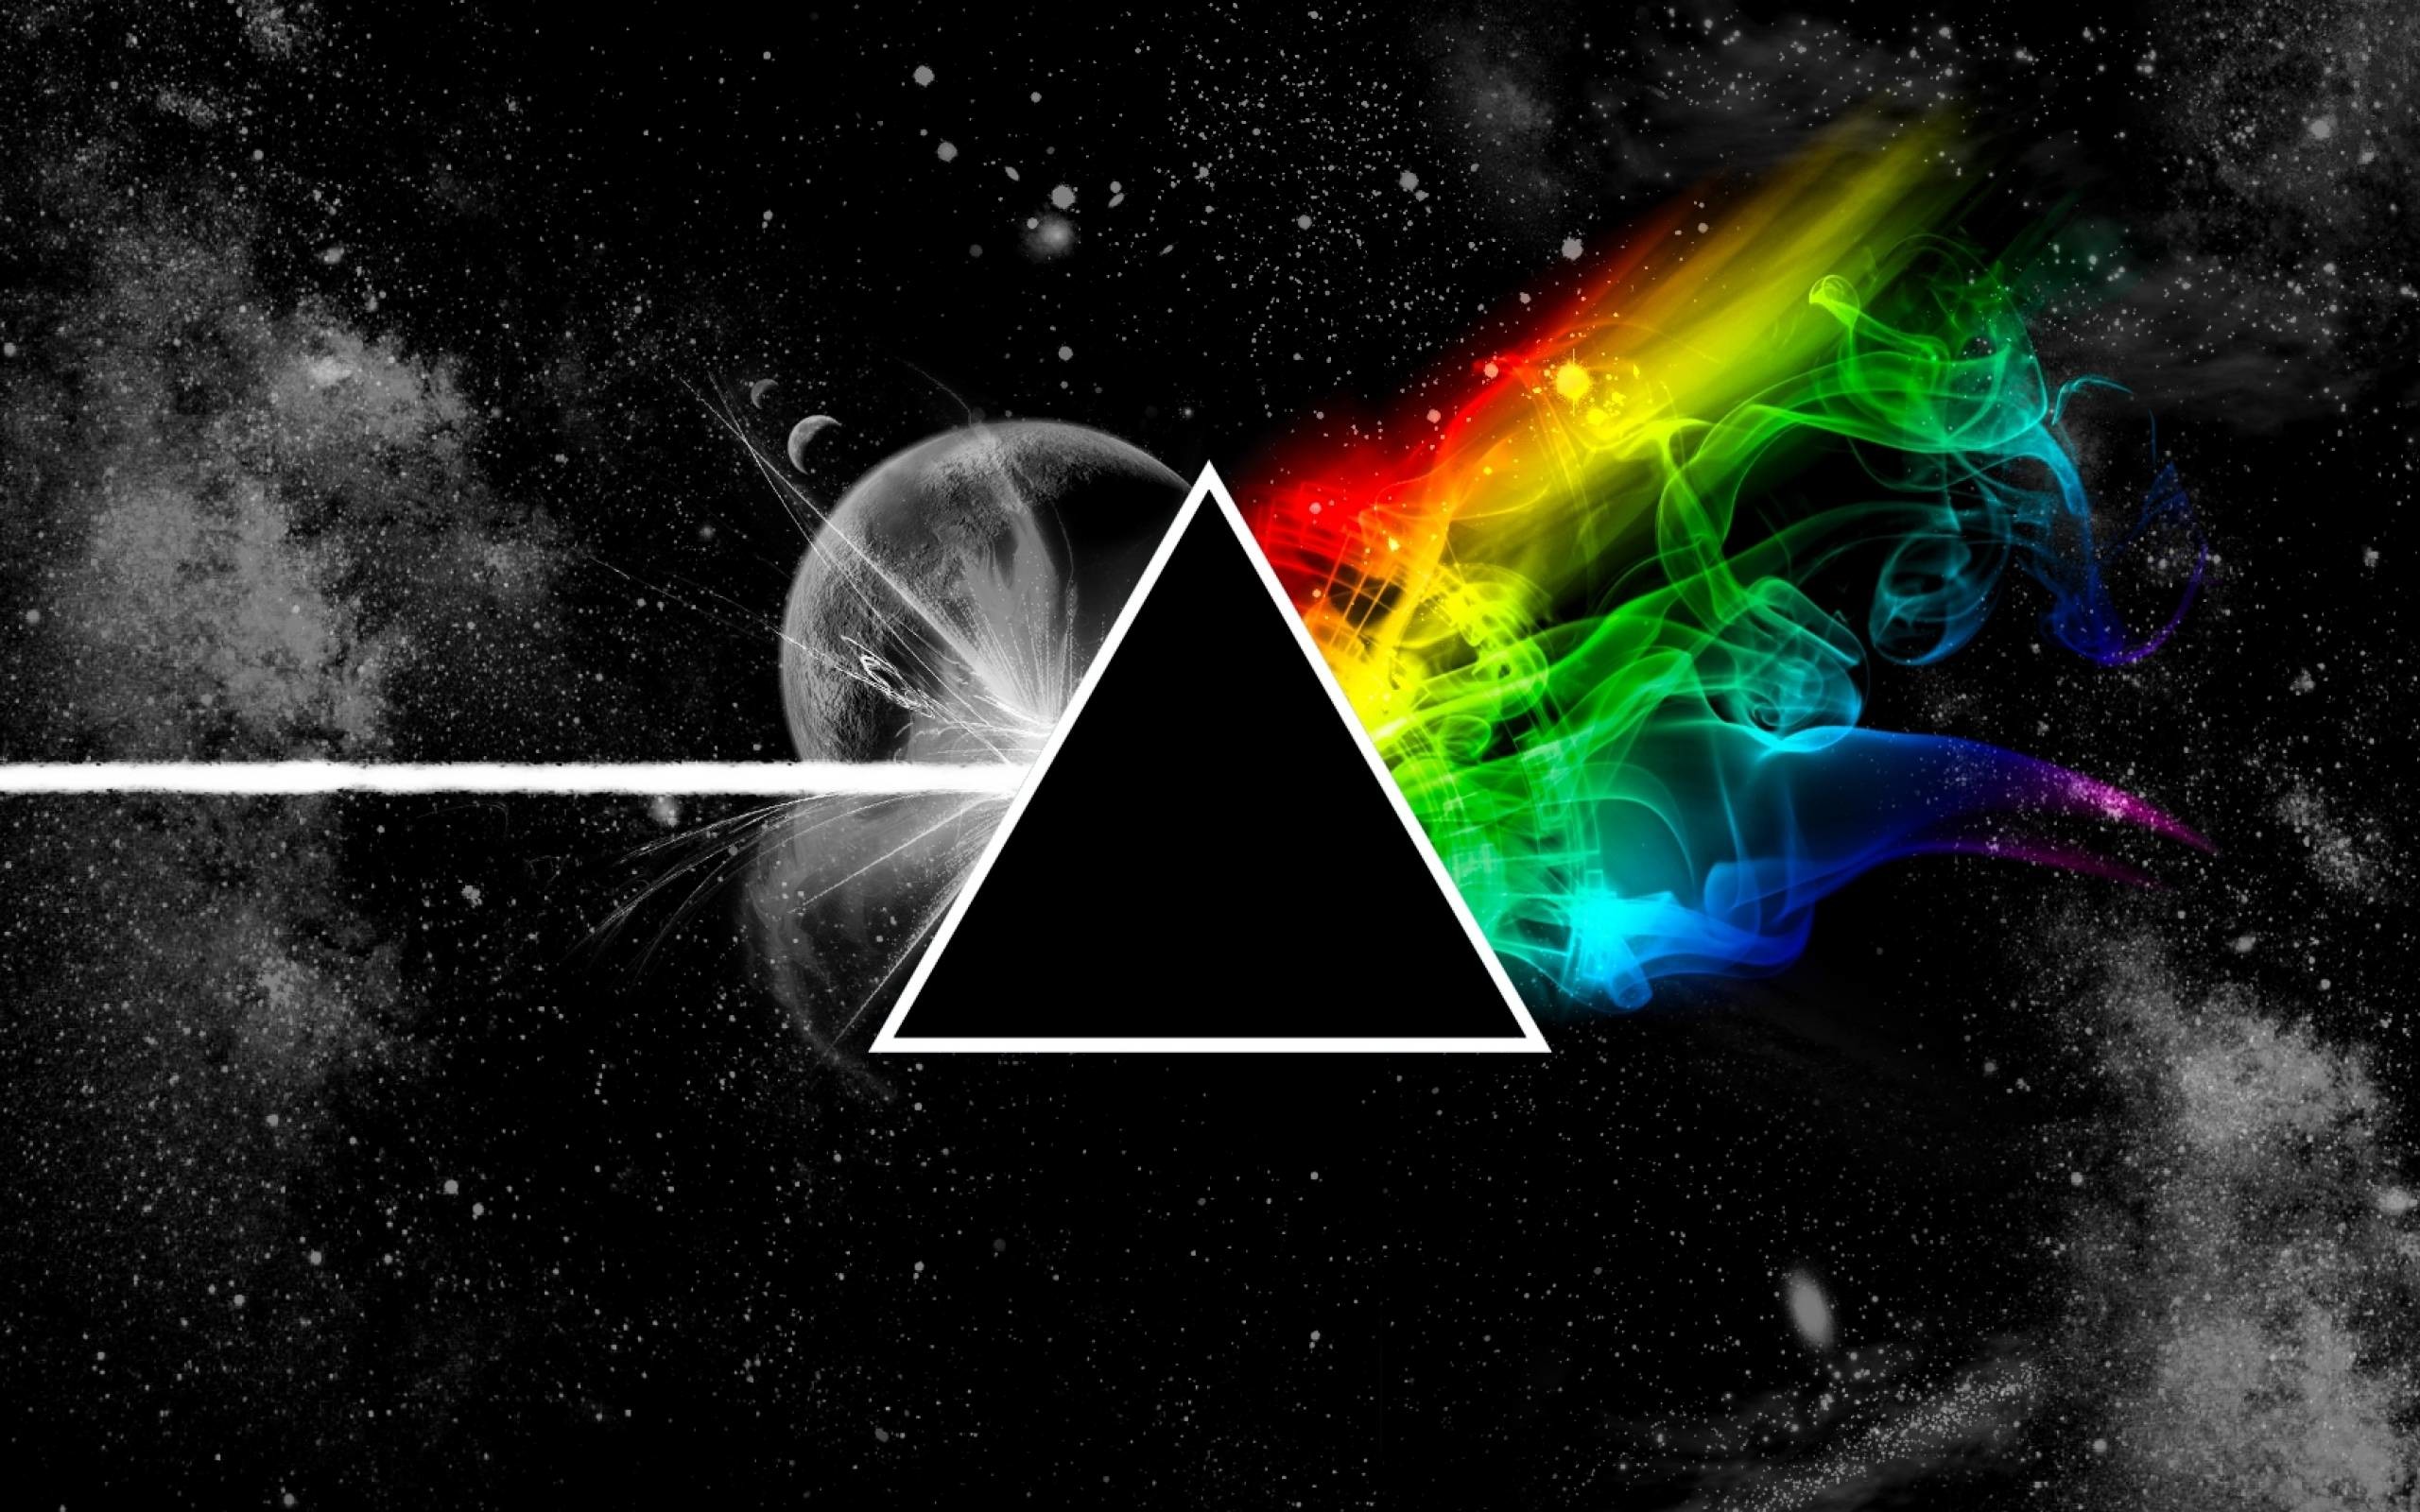 Pink Floyd Hd Wallpapers 1080p 81 Images HD Wallpapers Download Free Images Wallpaper [wallpaper981.blogspot.com]